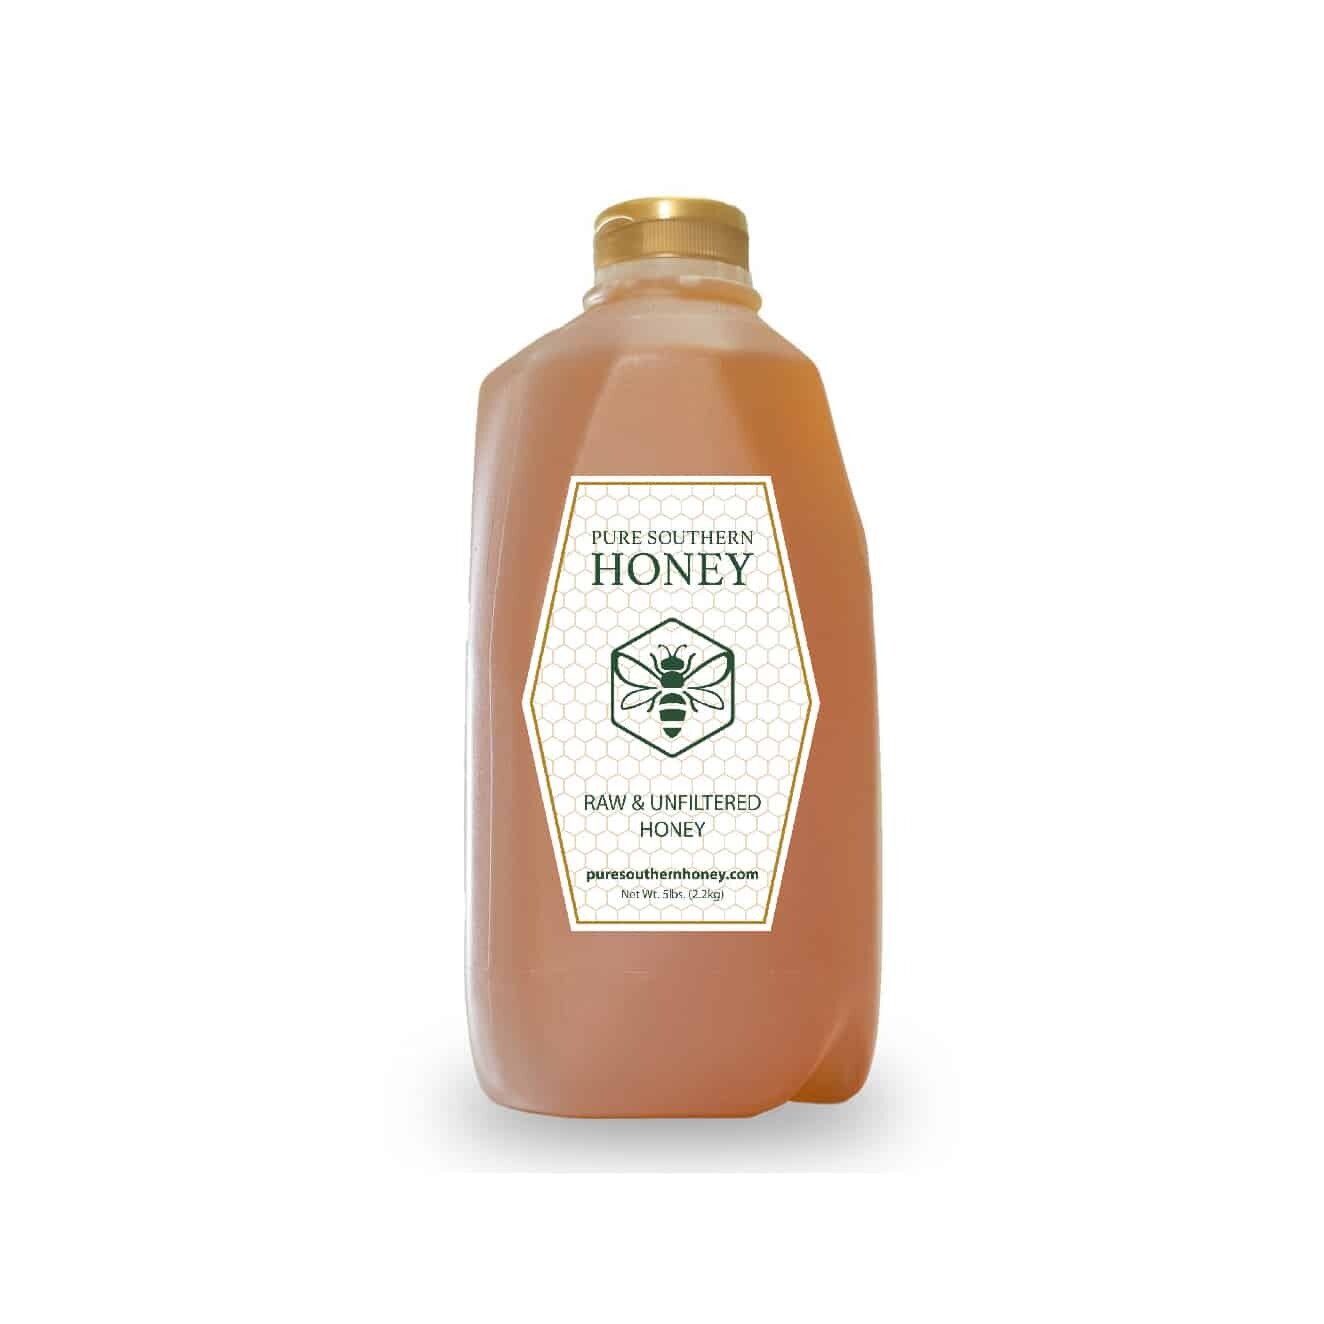 Raw & Unfiltered Honey - 5 lbs